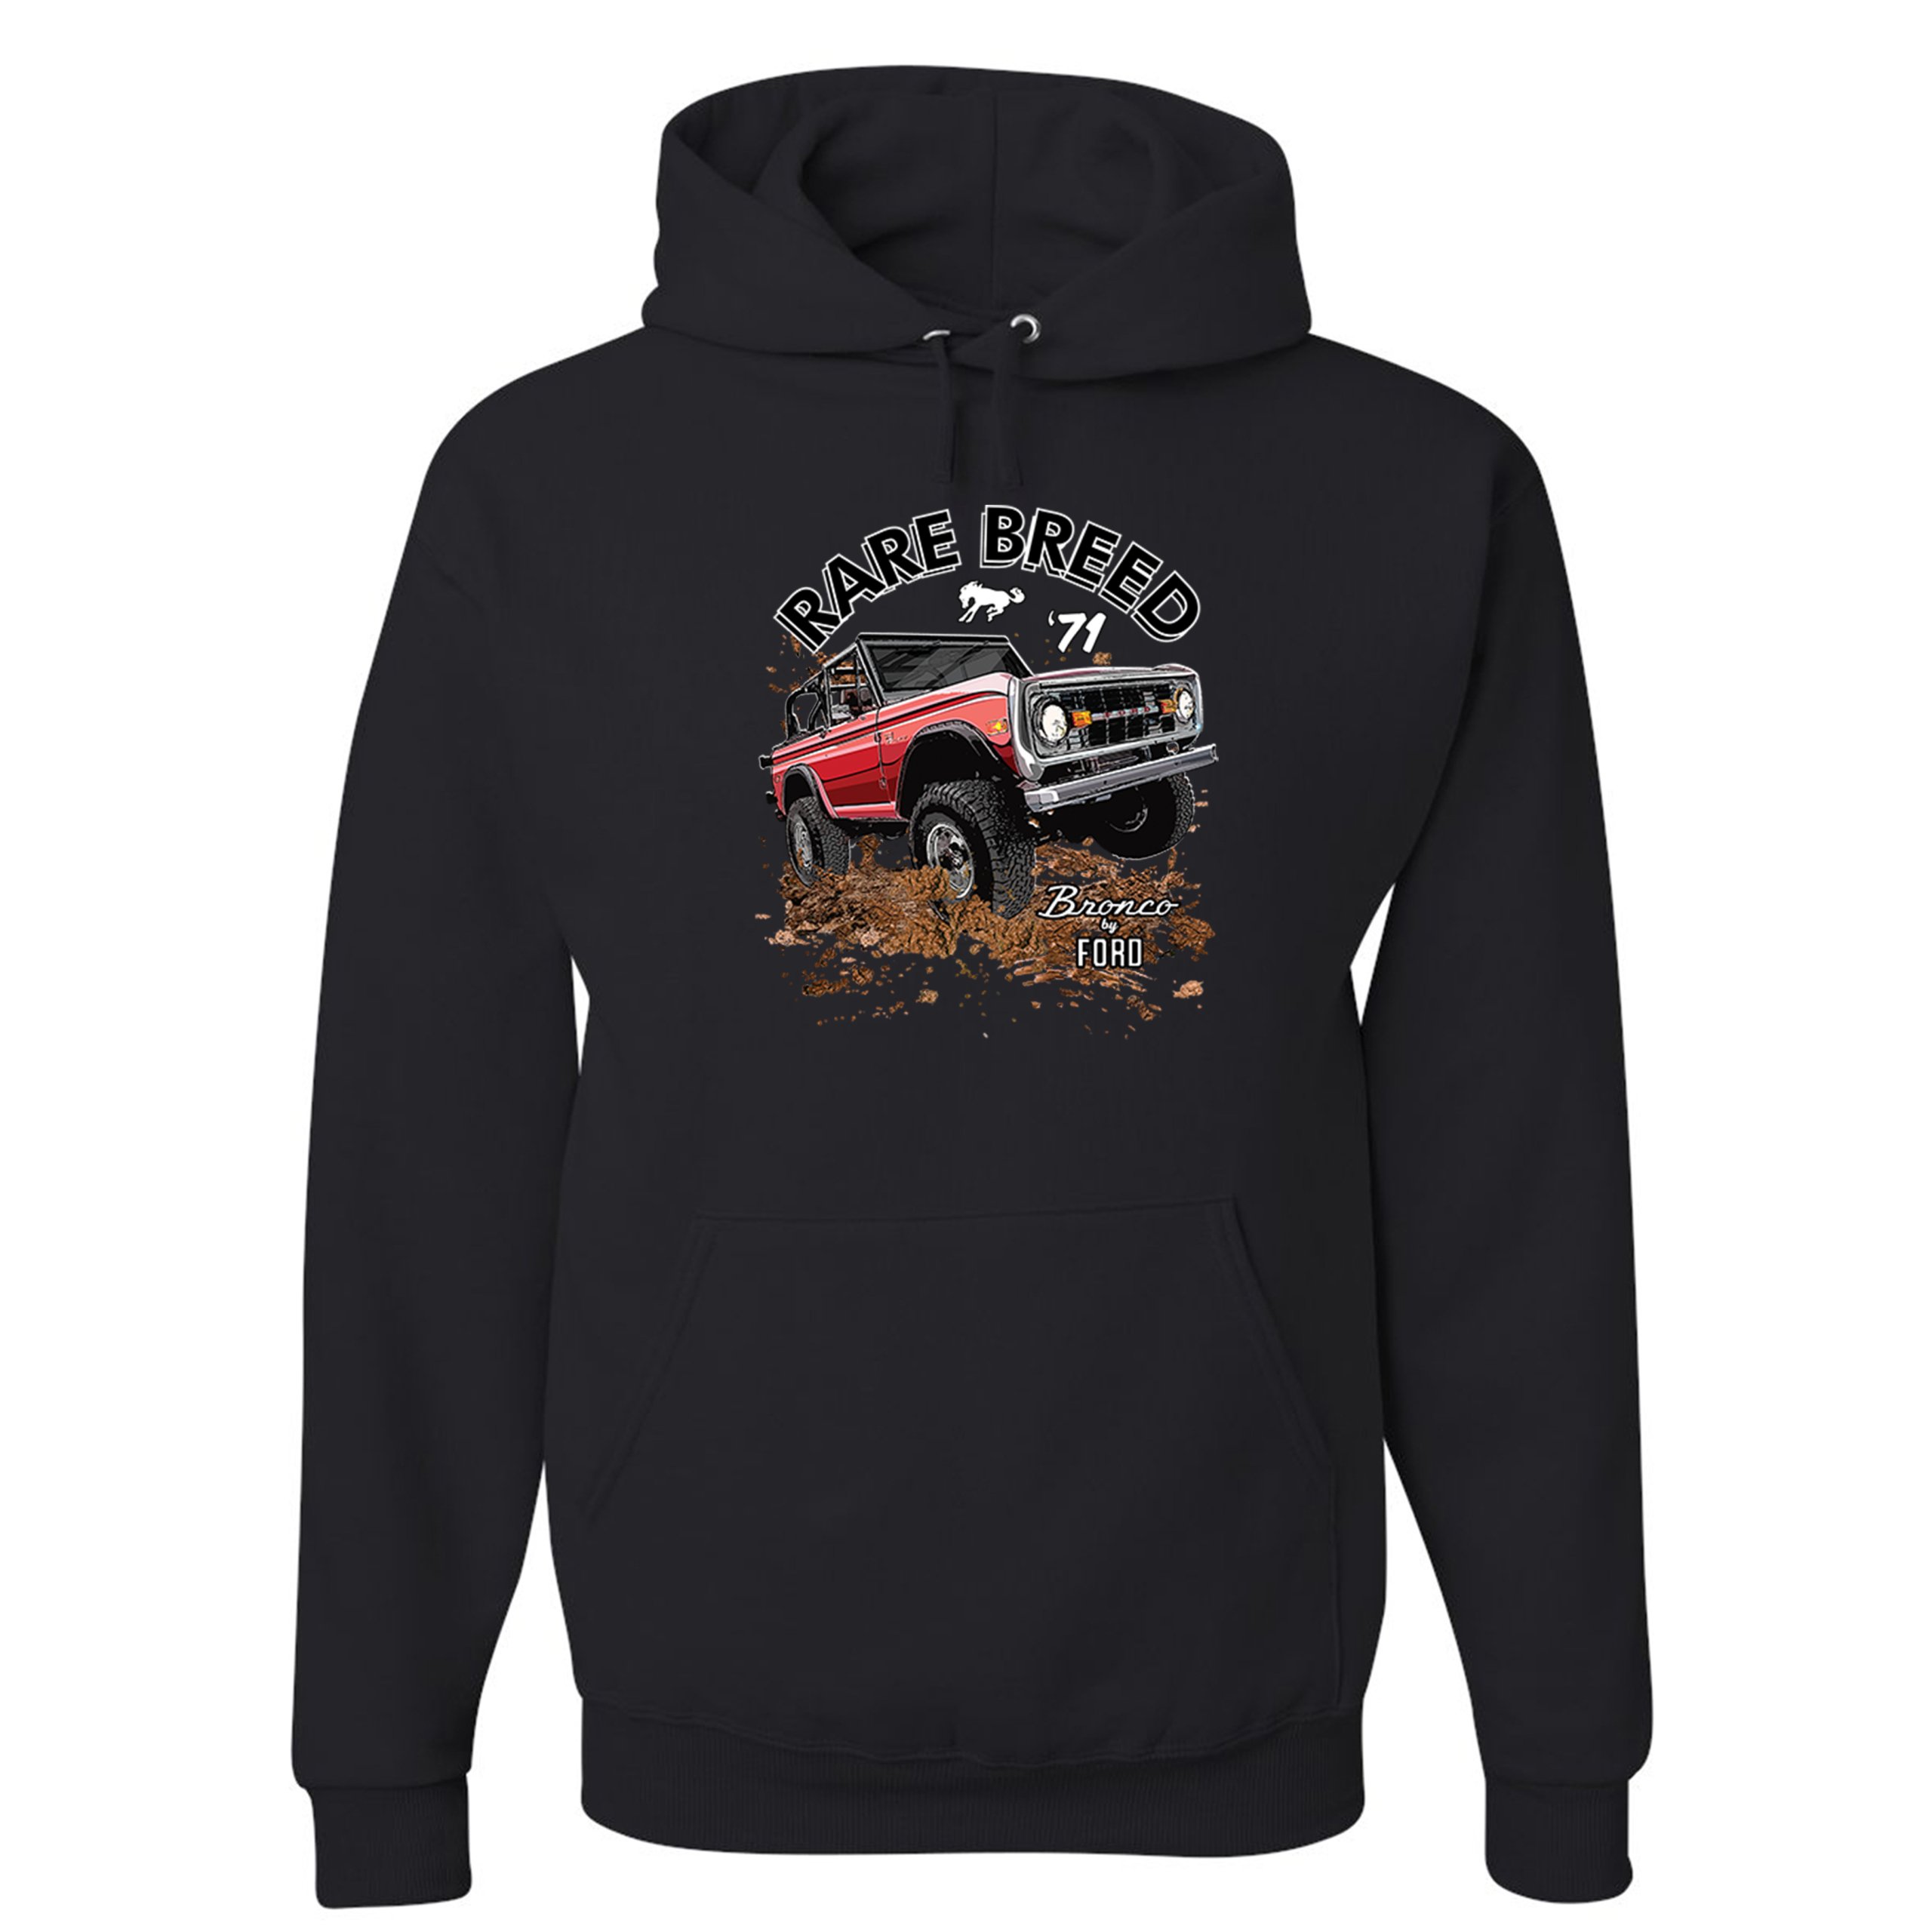 Bronco by Ford Sweatshirt Rare Breed '71 Offroad Ford Truck Licensed ...